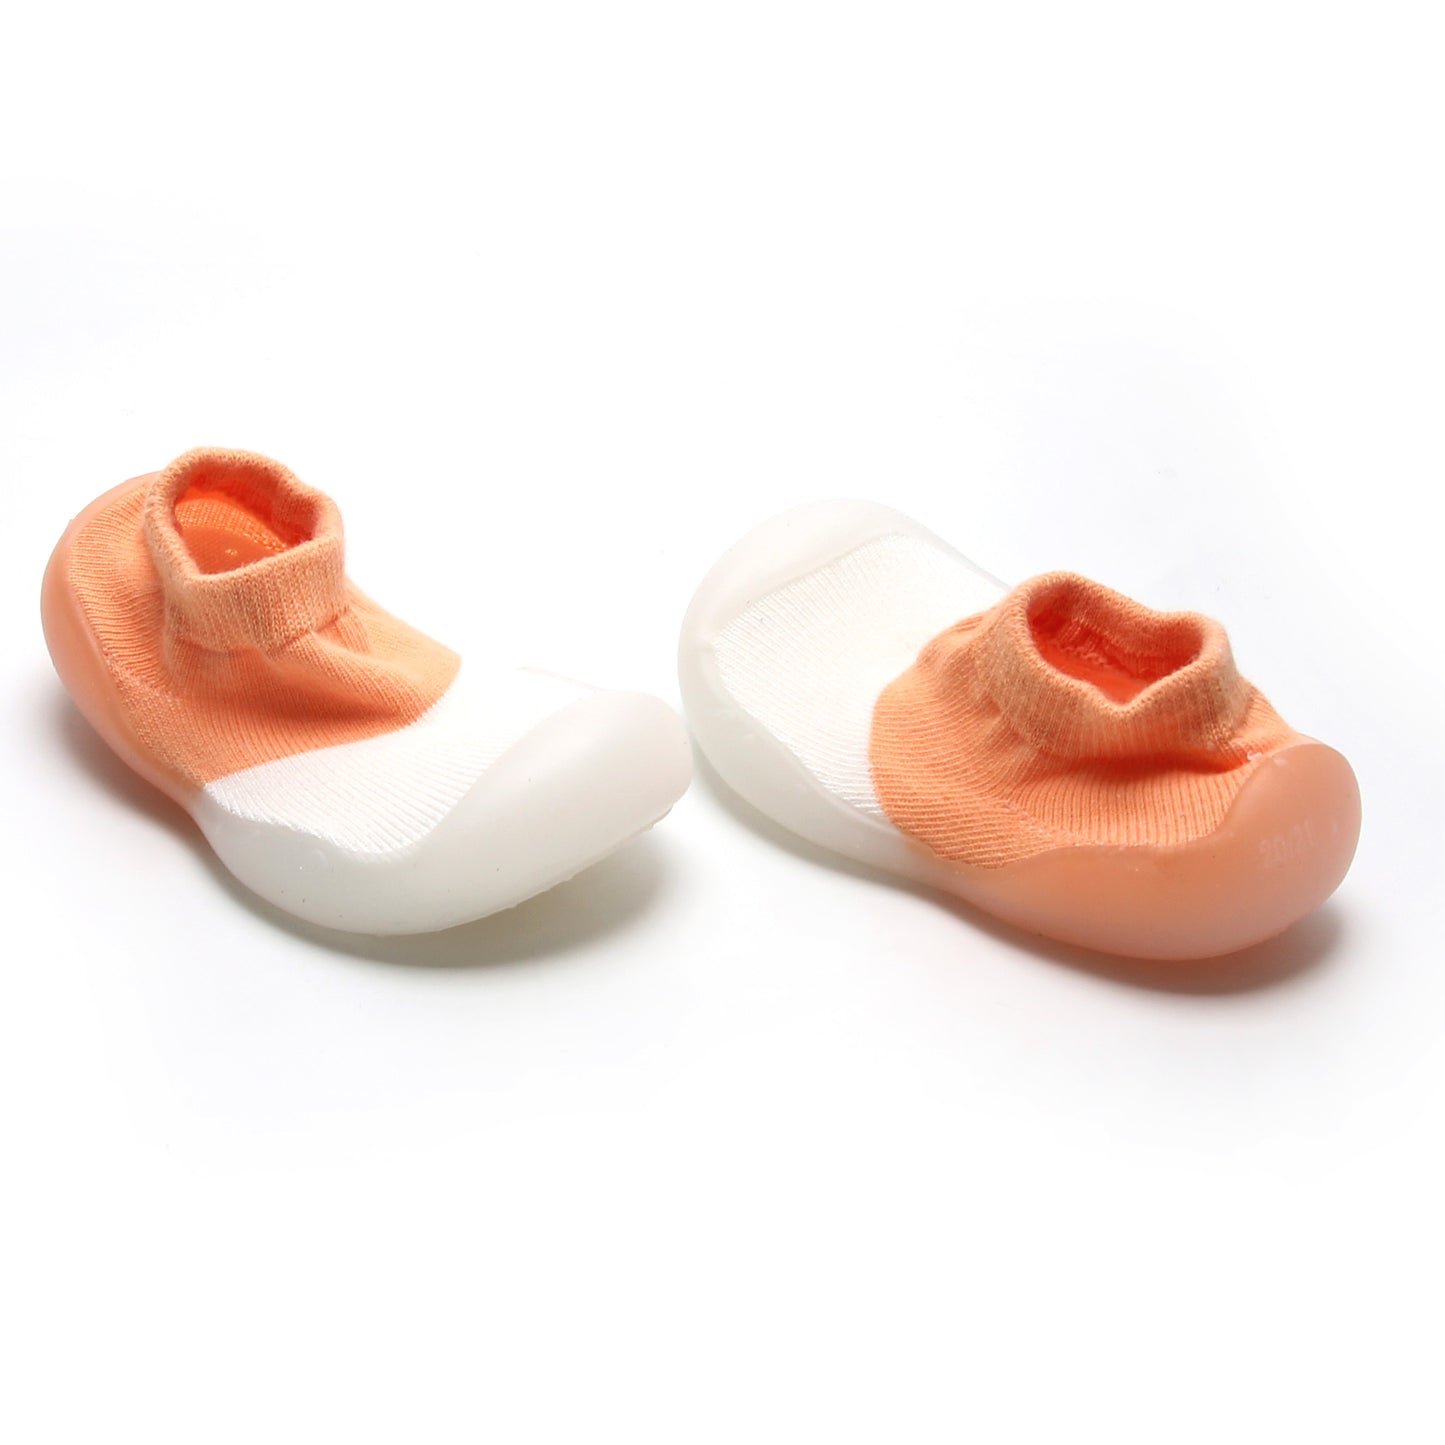 Peach/White two-toned Pre-Walker Sock Shoes